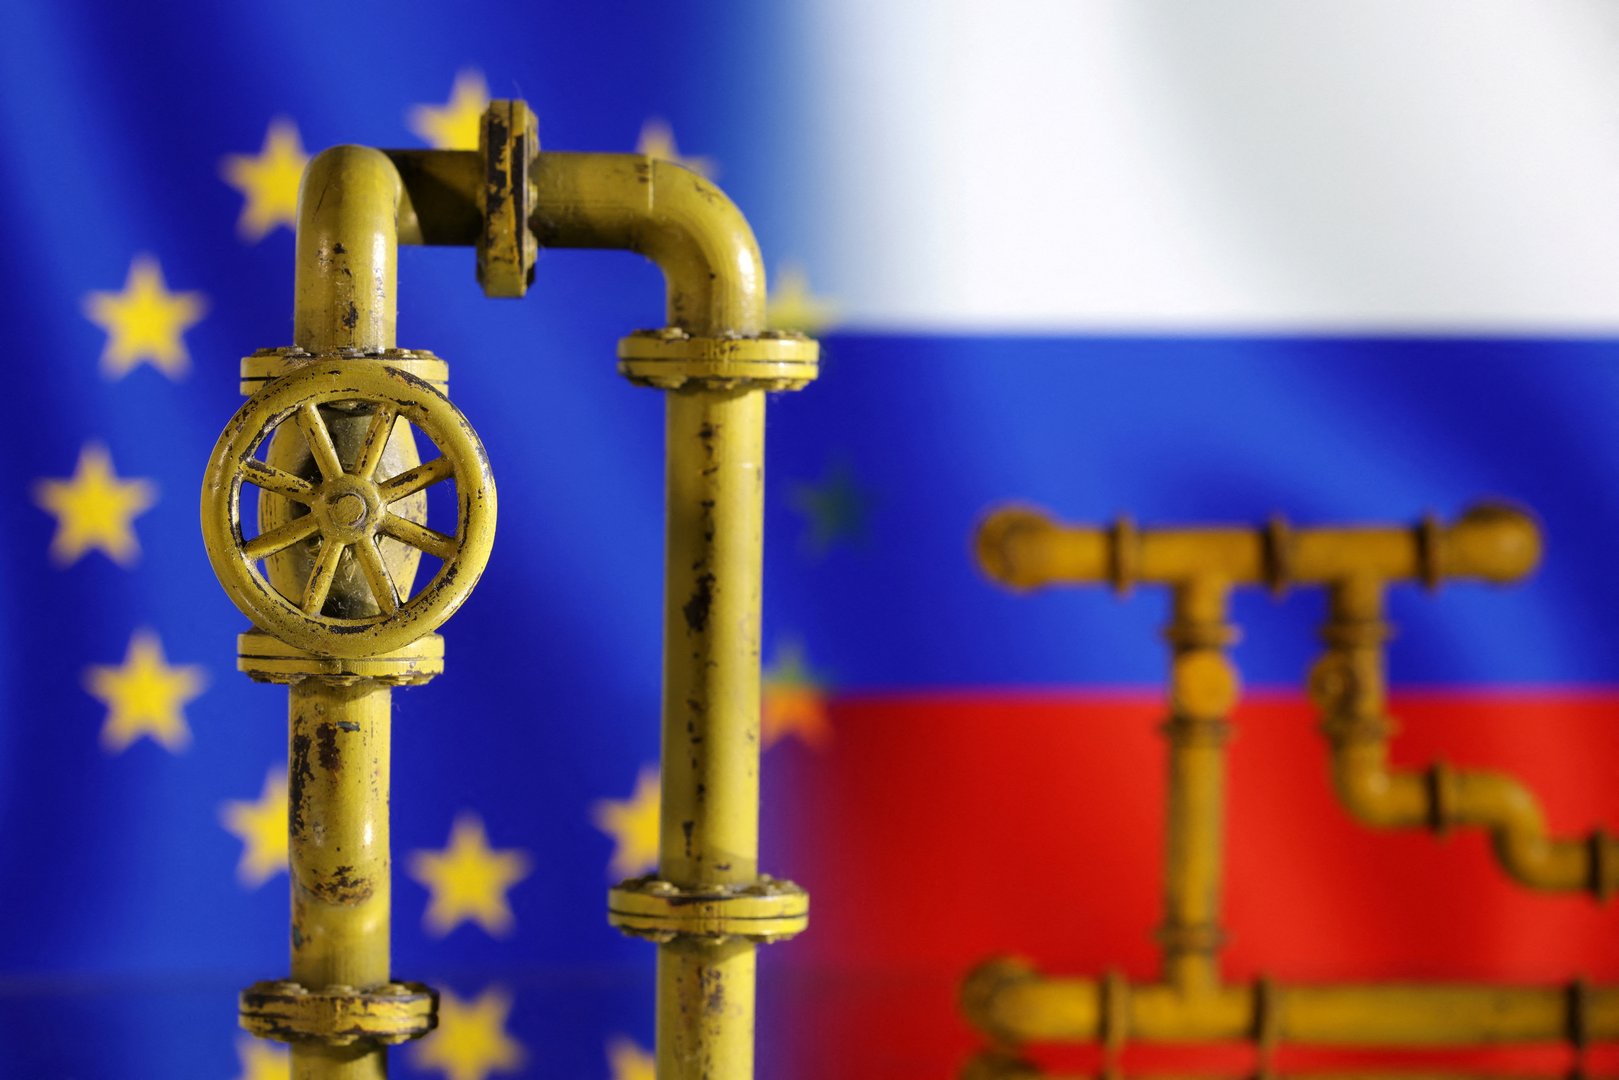 image SLB wins Russia business as oilfield rivals exit after Ukraine invasion